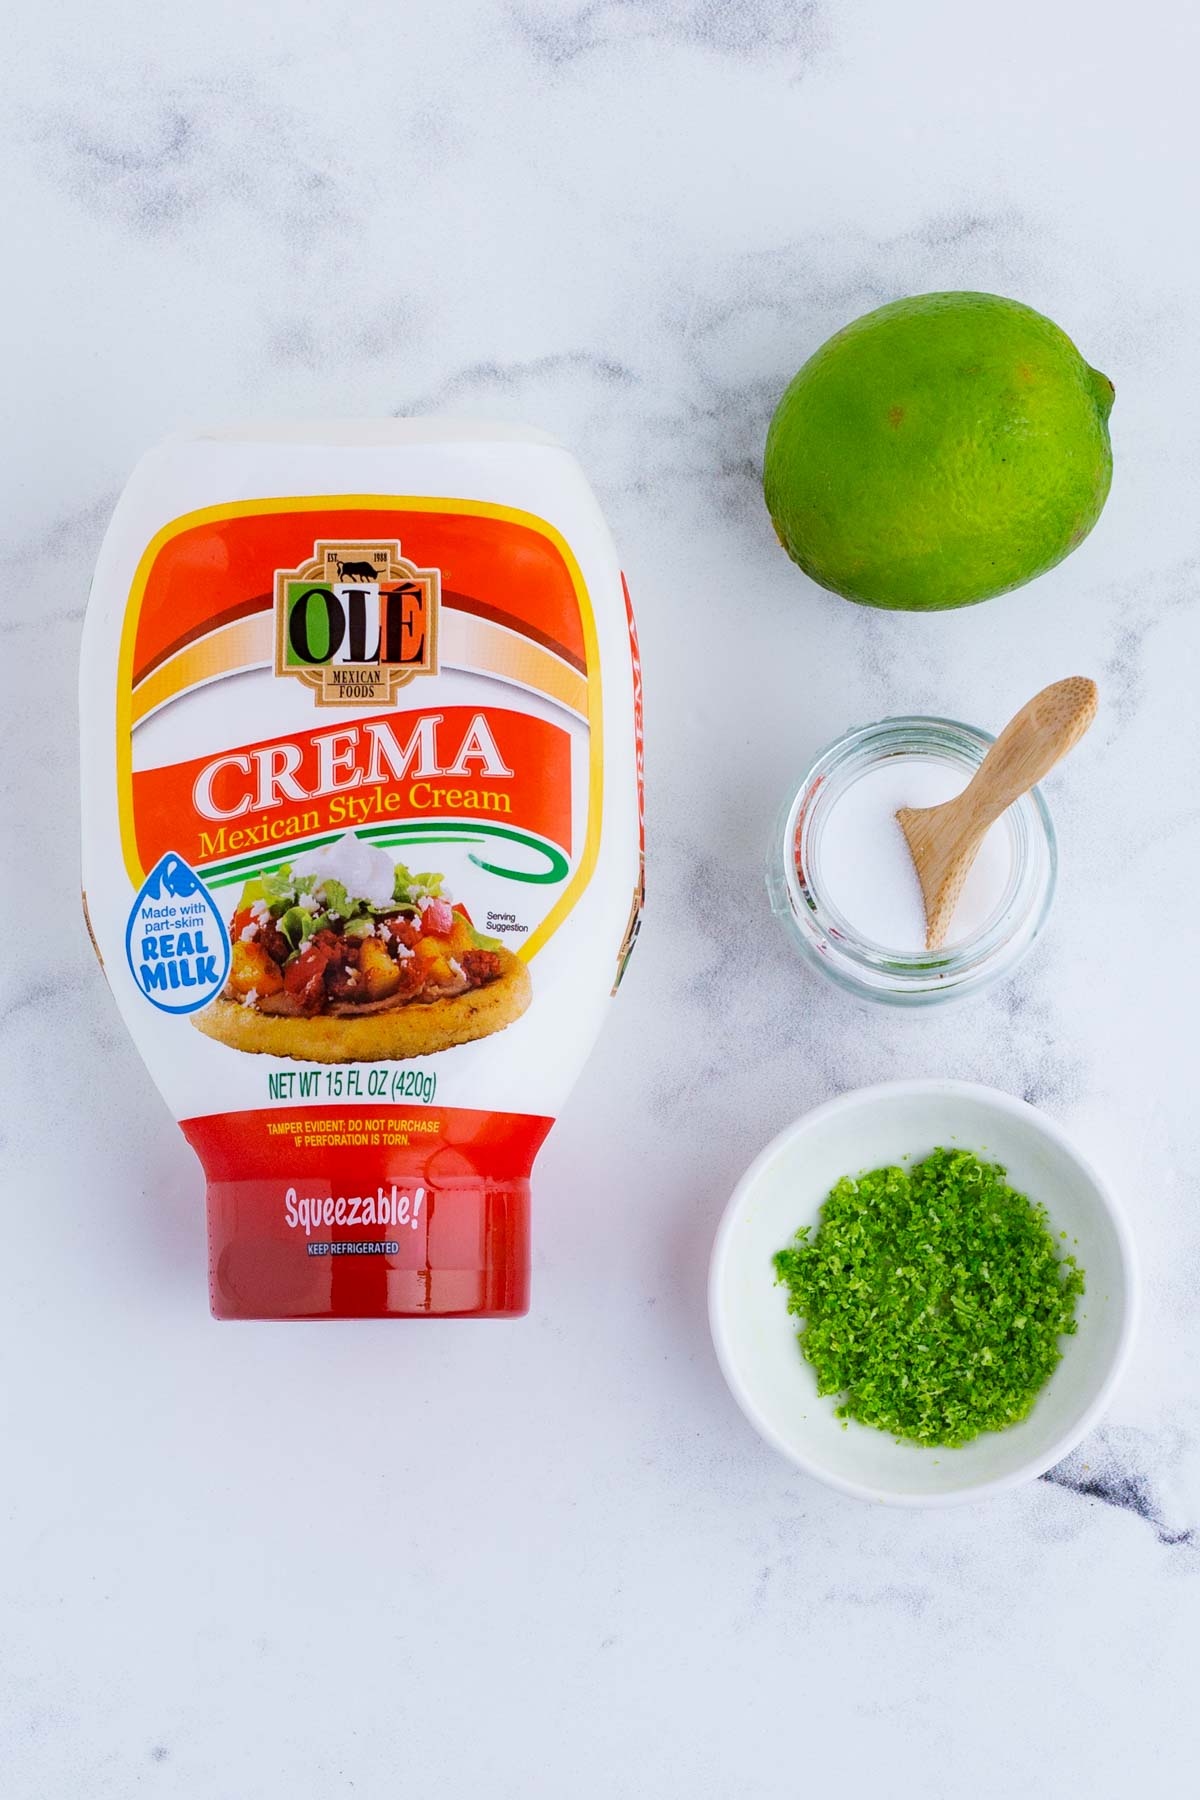 Crema, lime, and salt are the ingredients for the sauce.